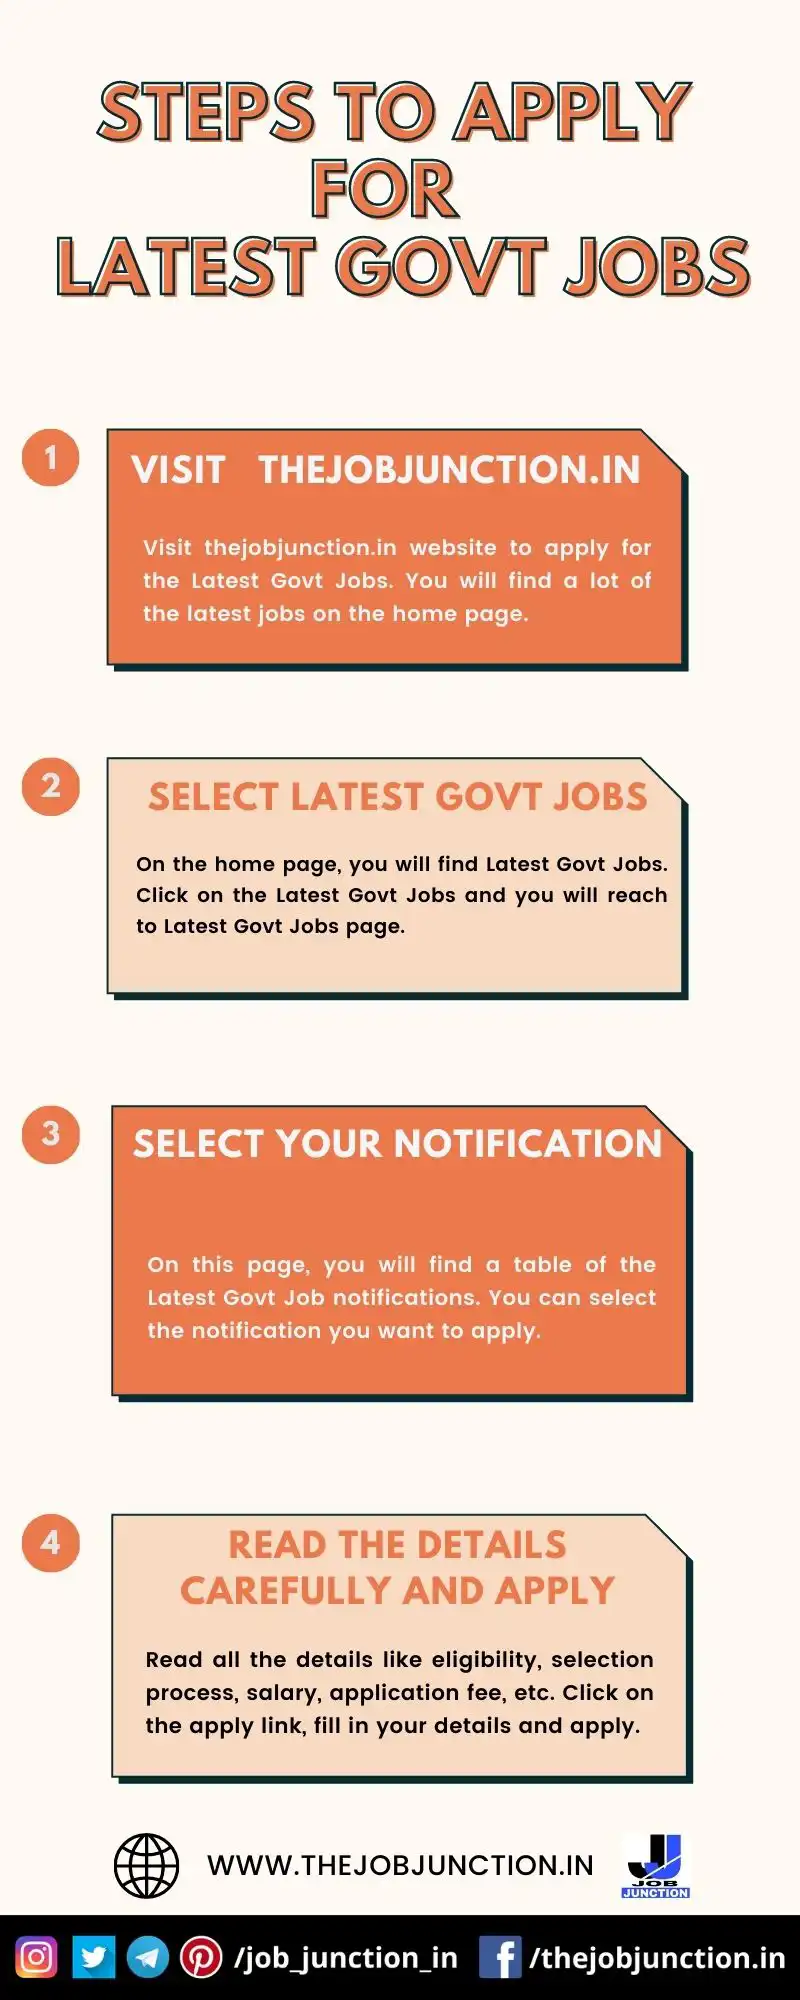 STEPS TO APPLY FOR LATEST GOVT JOBS